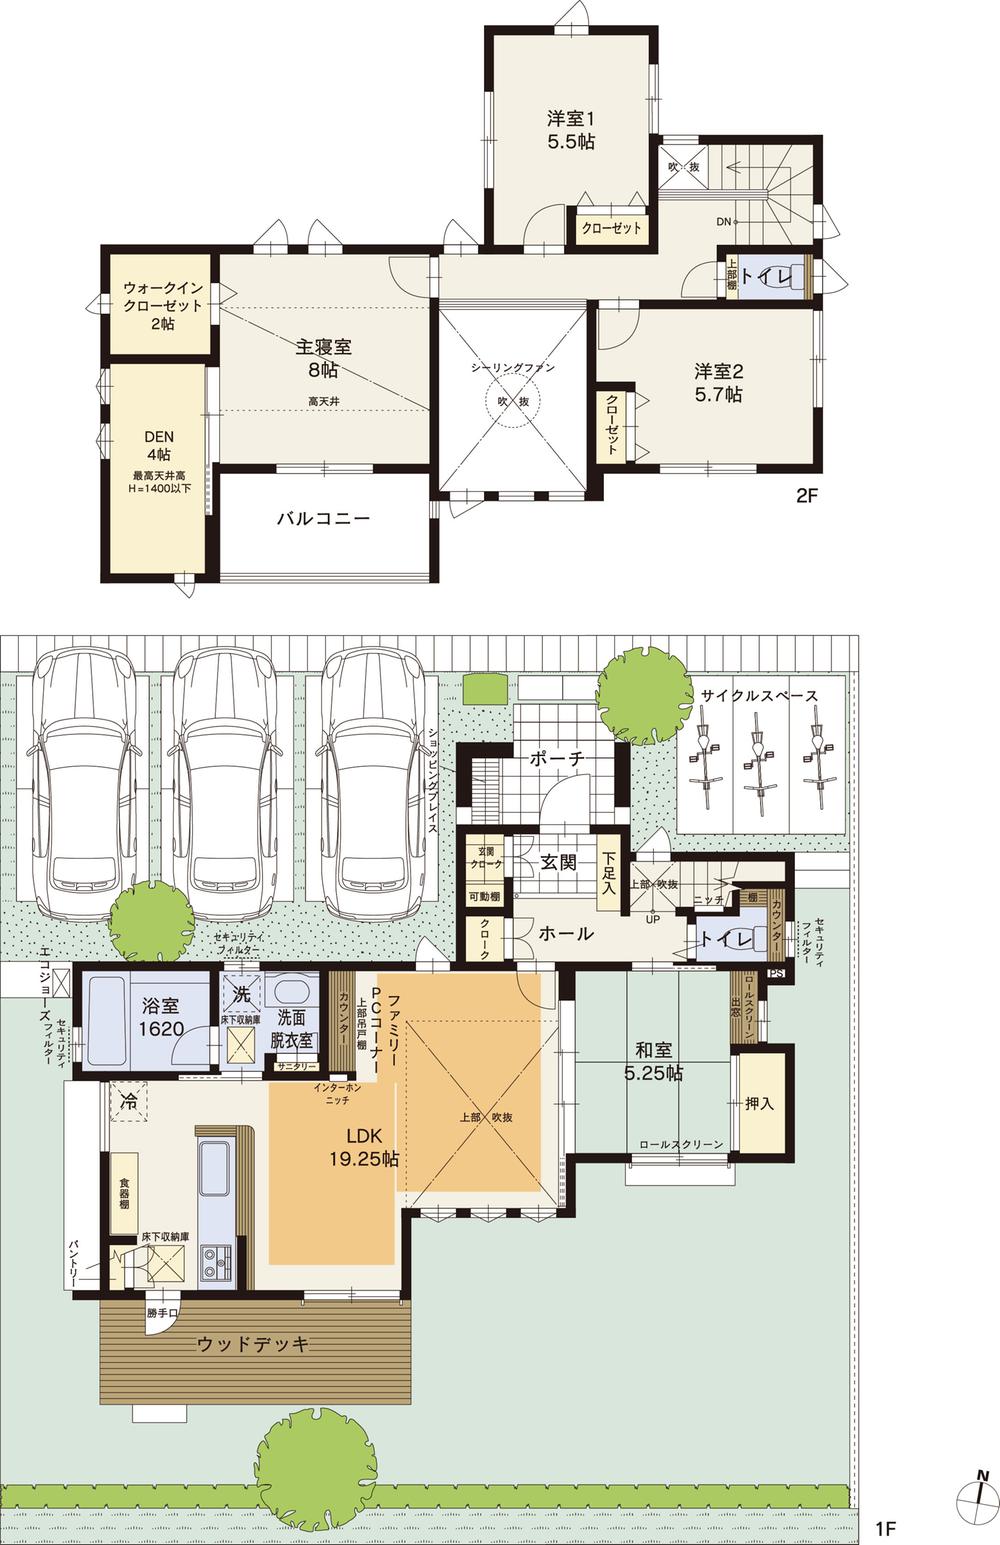 Floor plan. (The ・ Terminal No. 5 place (house with a family PC corner to blow the living)), Price 28.8 million yen, 4LDK, Land area 215.28 sq m , Building area 125.26 sq m